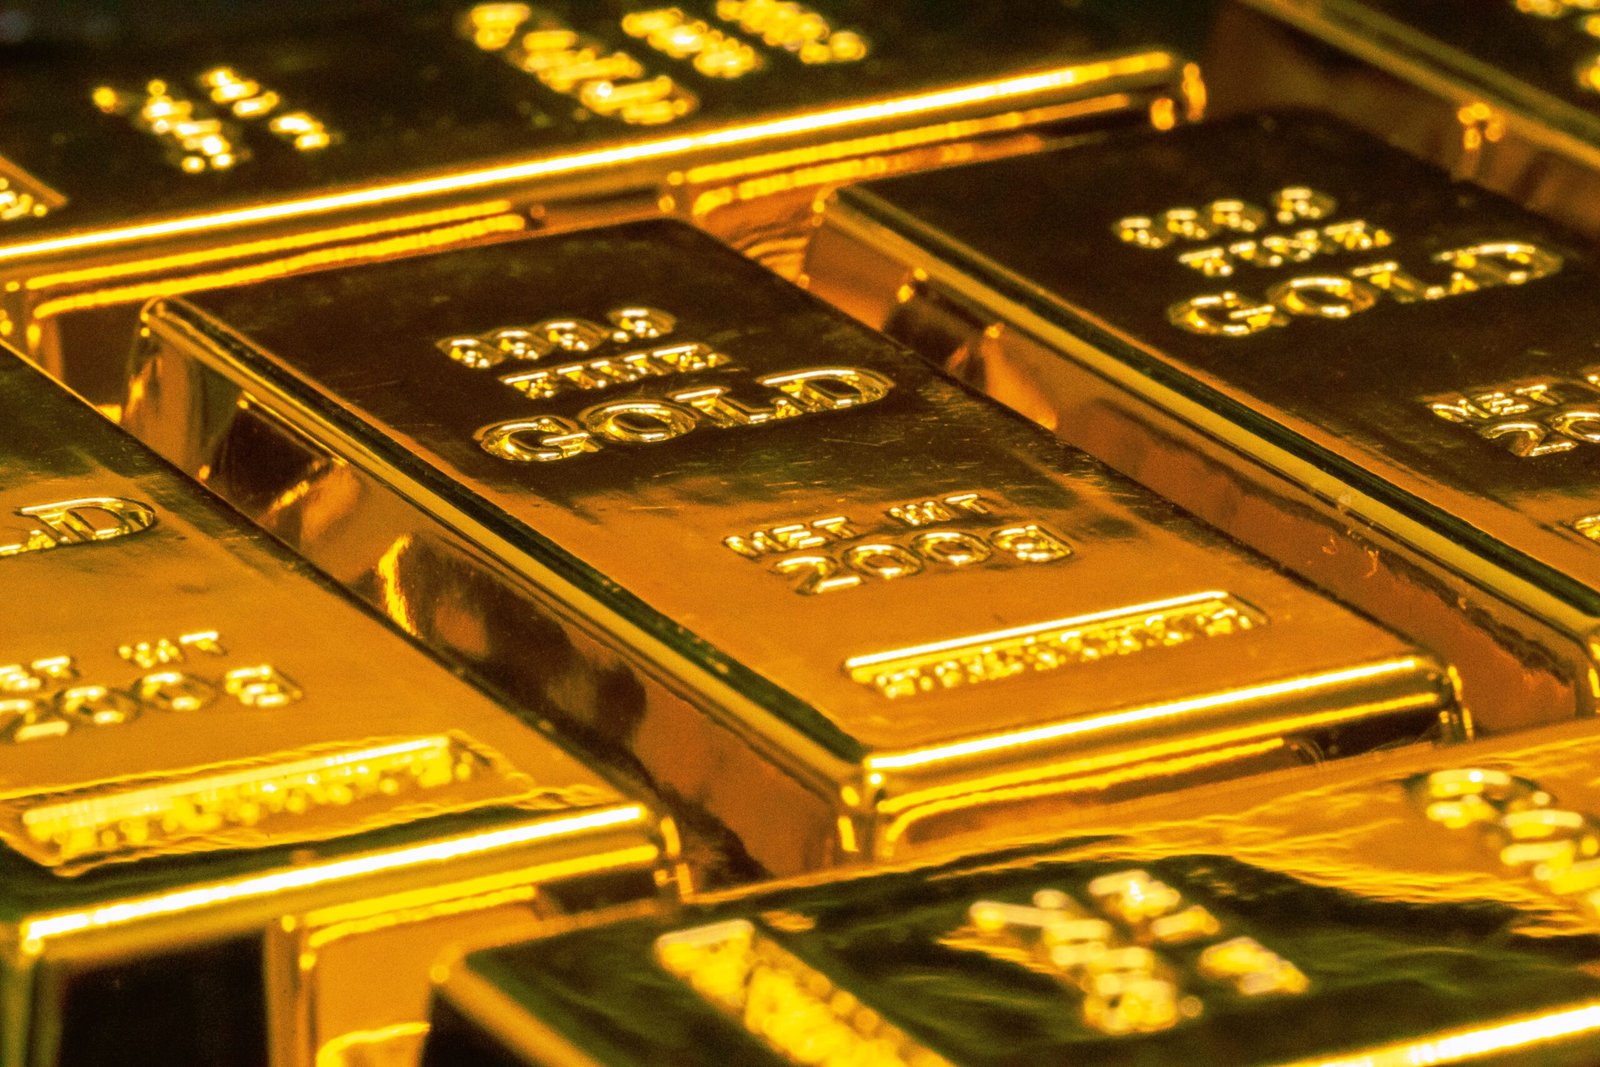 Trusted Platforms for Buying Authentic Gold and Silver Bars